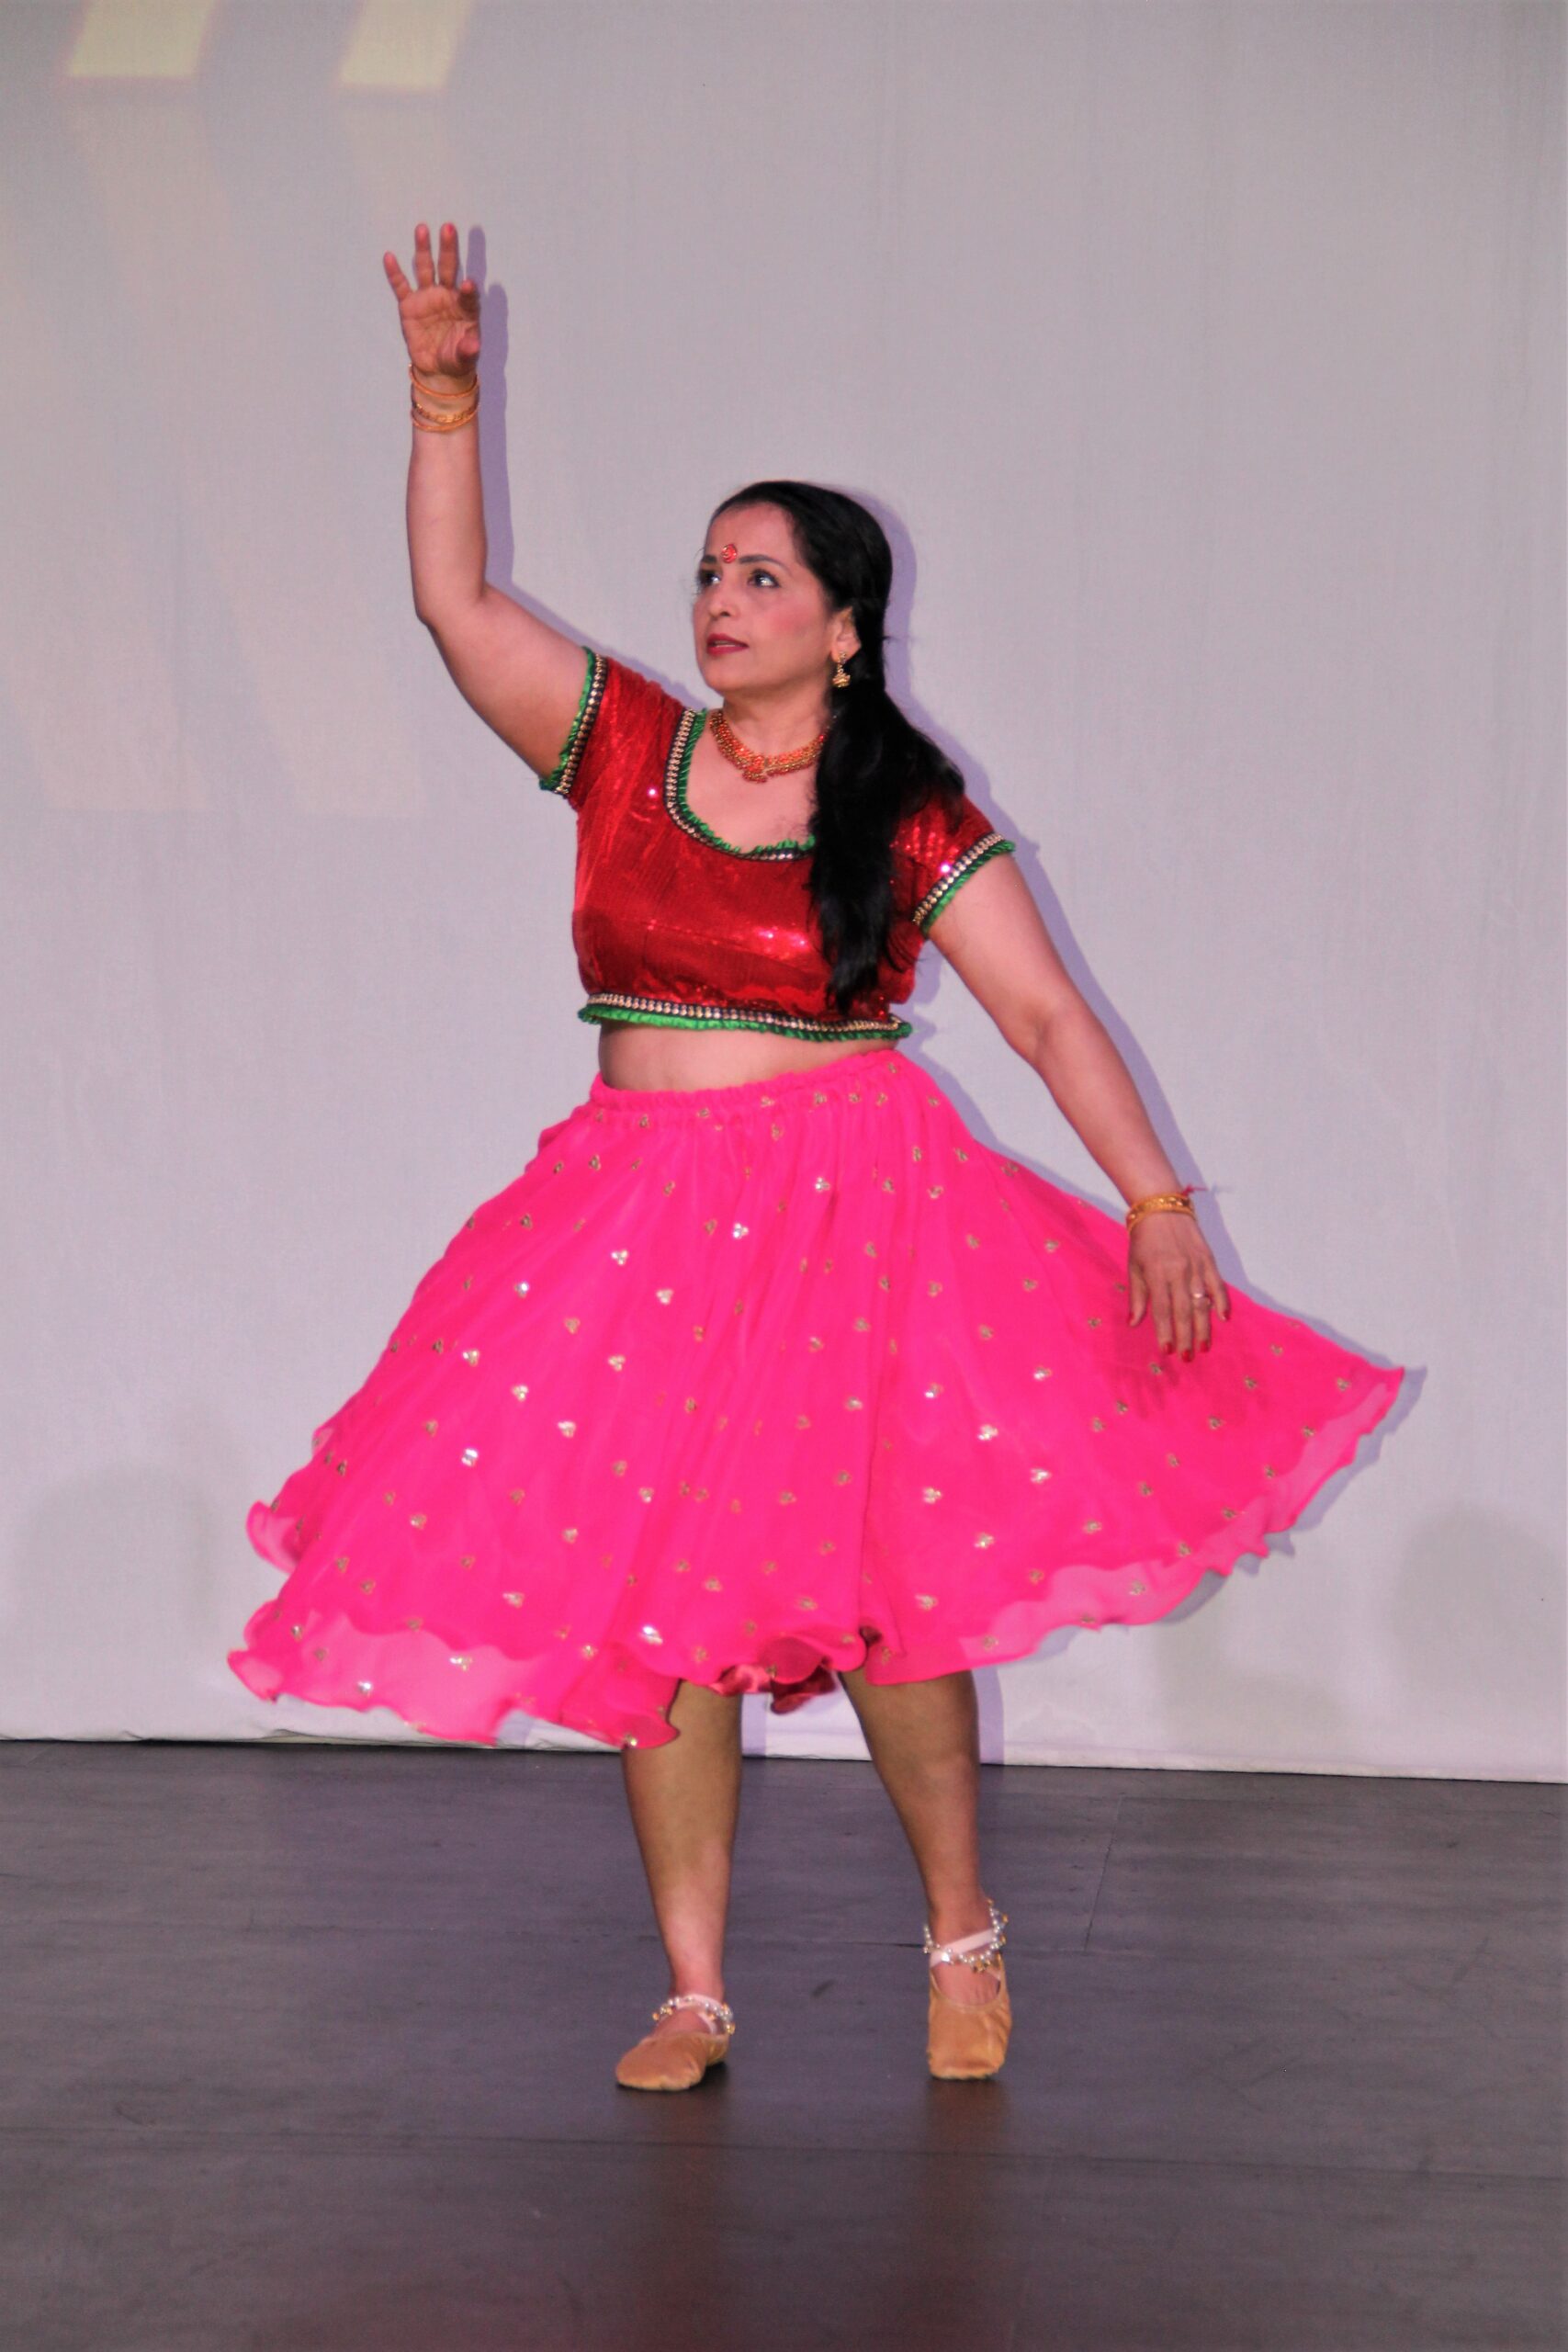 Dance Expression student, Jayshri Venkataraman elegantly performing at the 2023 Dance Expression showcase in Ajax, wearing a vibrant pink and red dance costume.